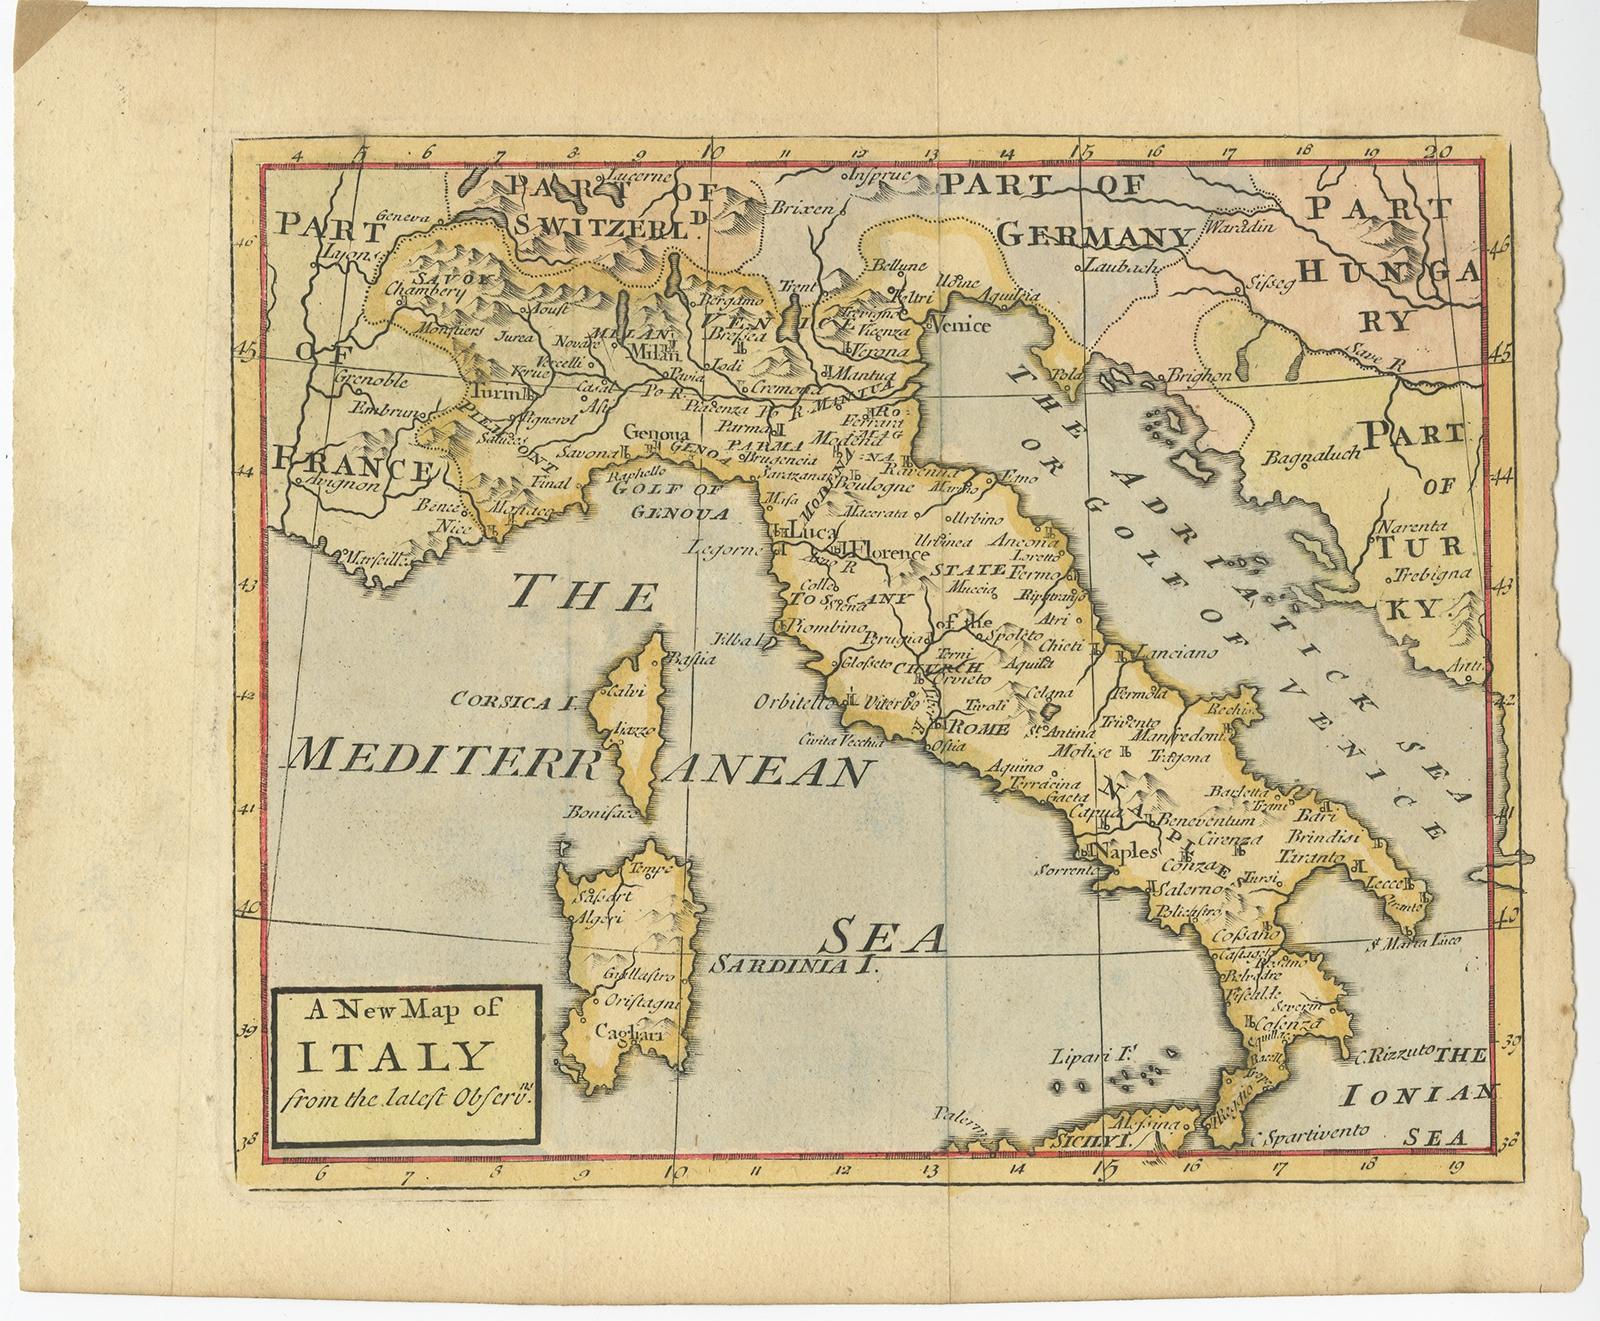 Antique map Italy titled 'A New Map of Italy from the latest observations'. 

Antique map of Italy originating from 'Geography Anatomiz'd: or, The Geographical Grammar'. Artists and Engravers: Published by P. Gordon, London

Condition: Very